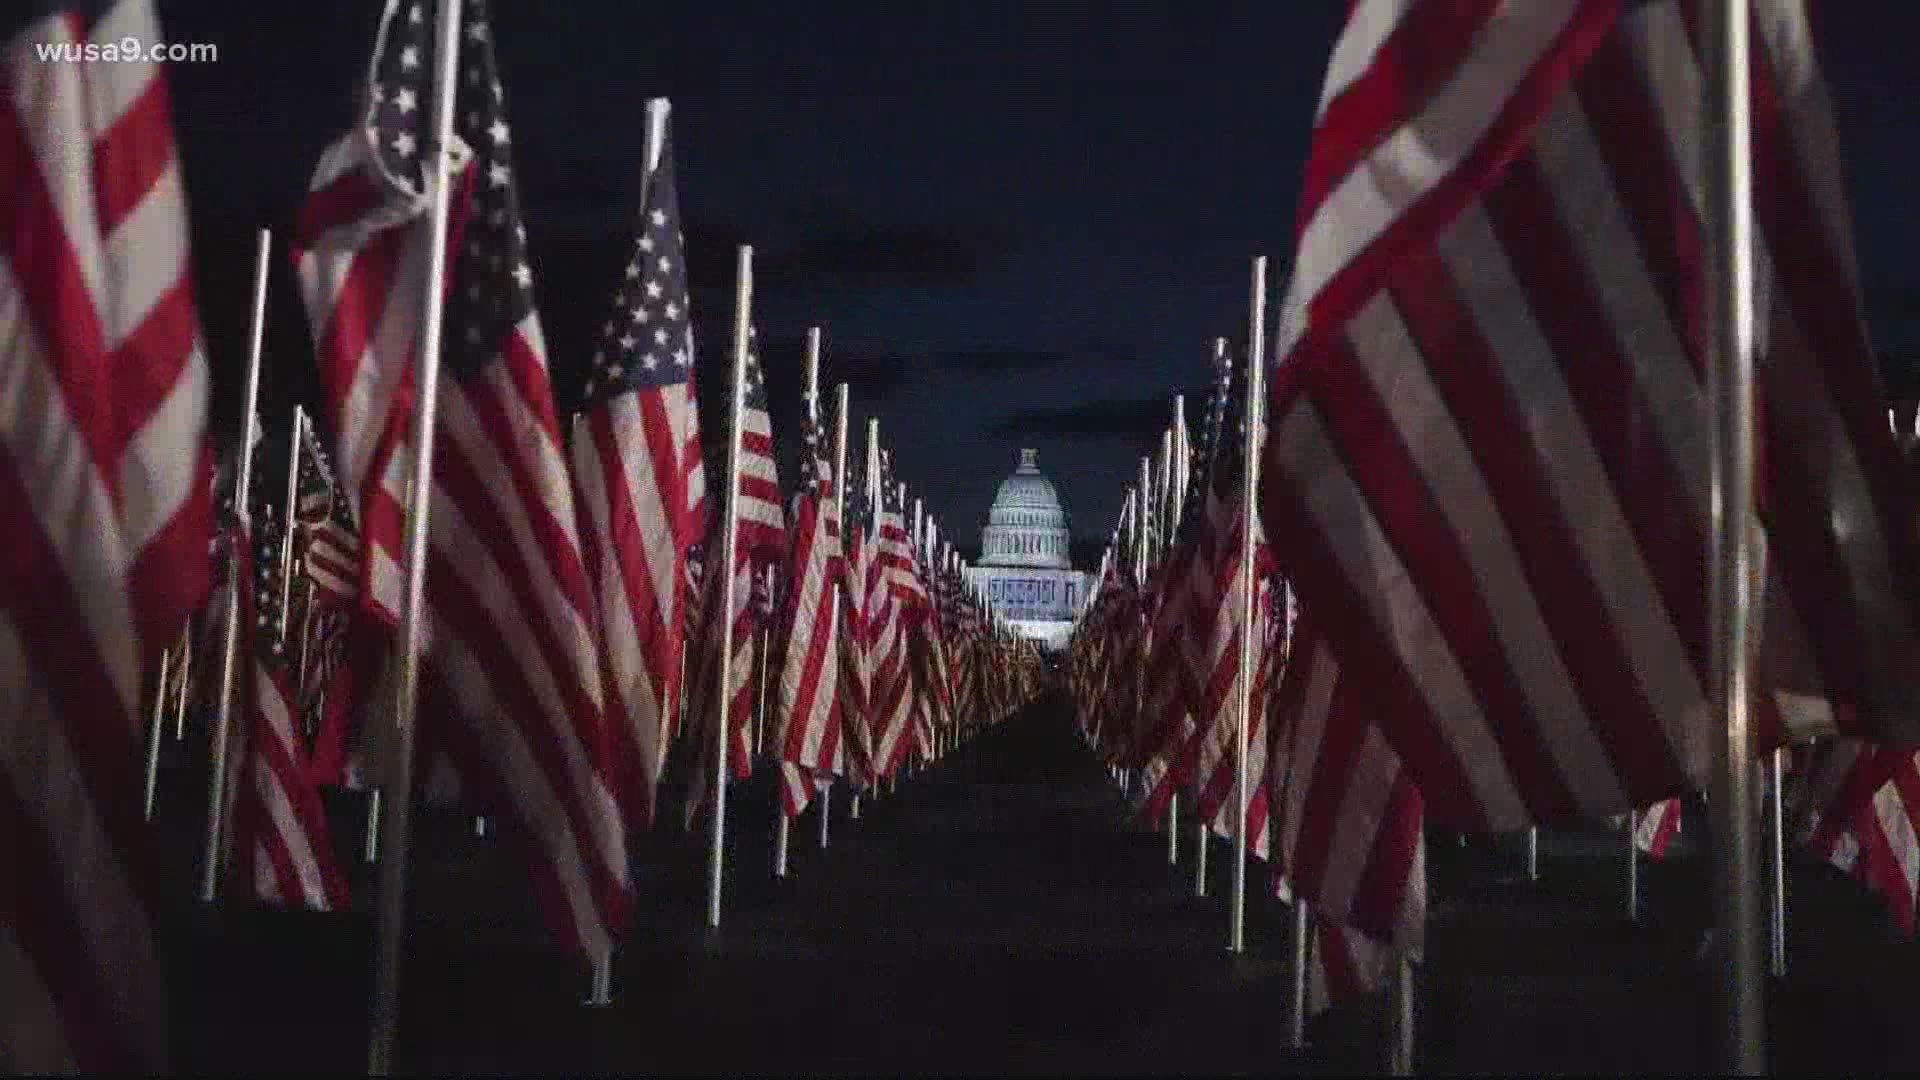 Police handed the flags that lined the National Mall on Inauguration Day out to passersby as a memento.